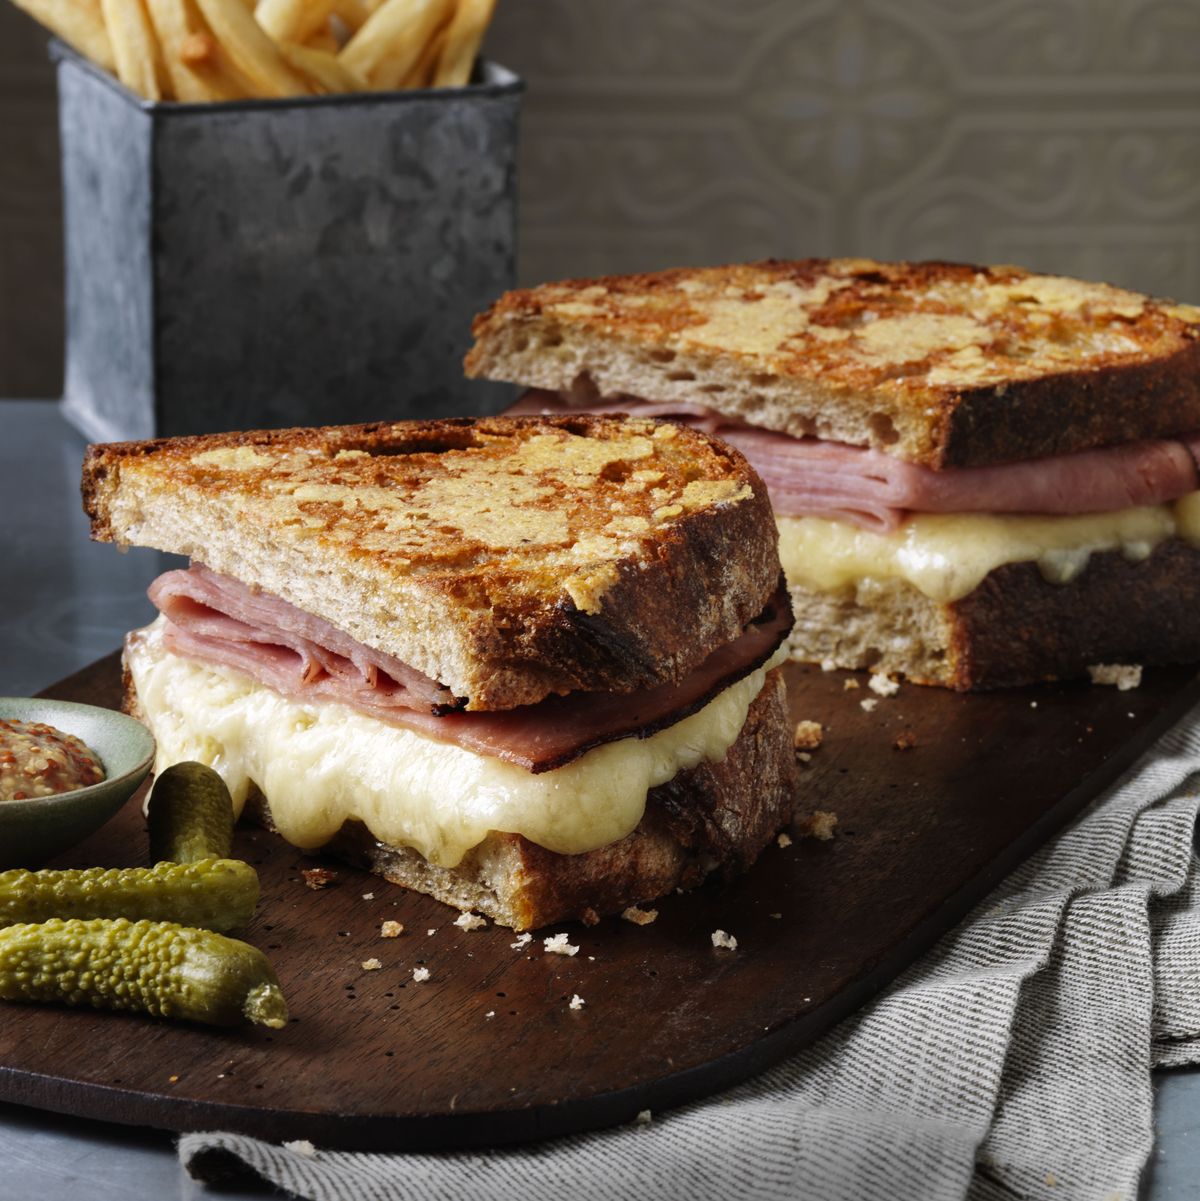 smoked ham and grilled cheese